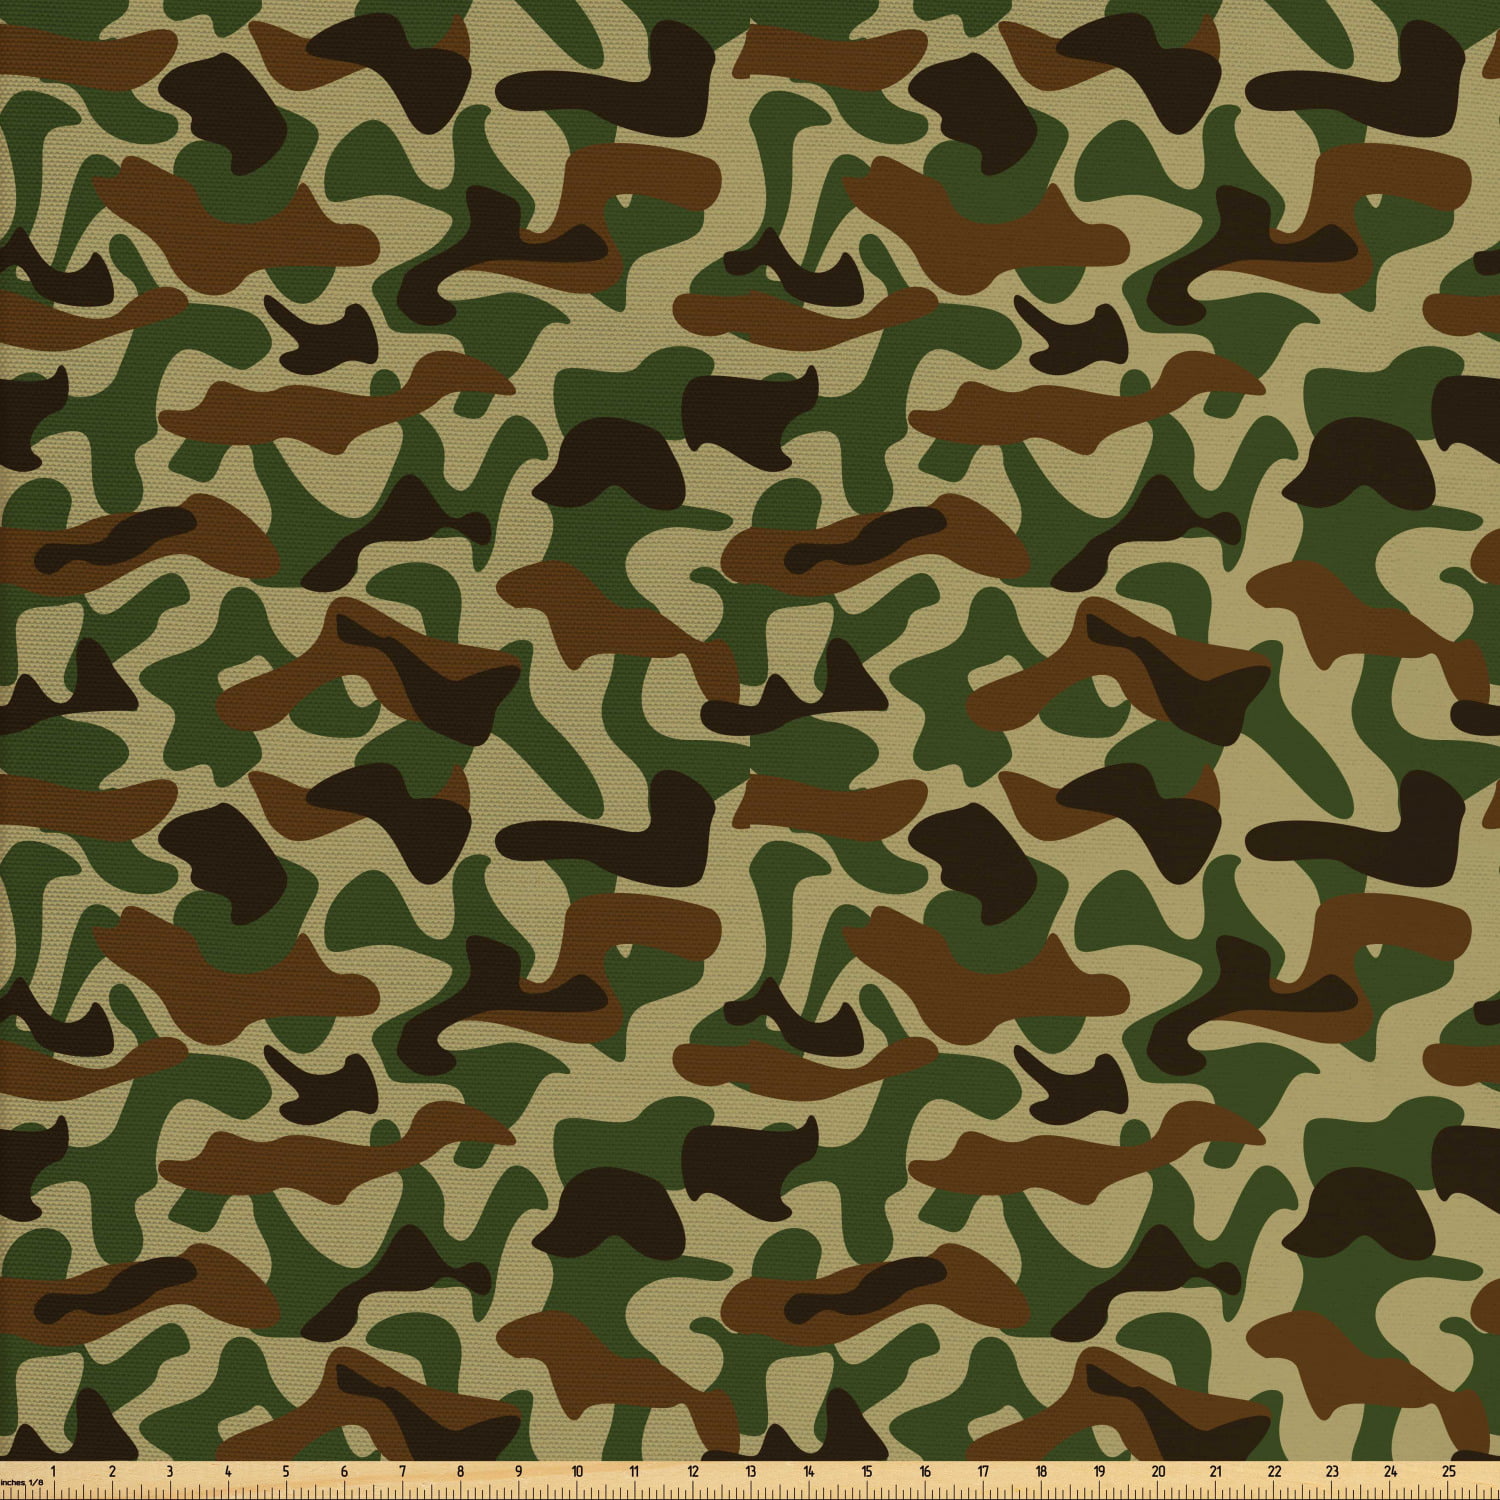 Camouflage Fabric by The Yard, Squad Uniform Design with Vivid Color ...